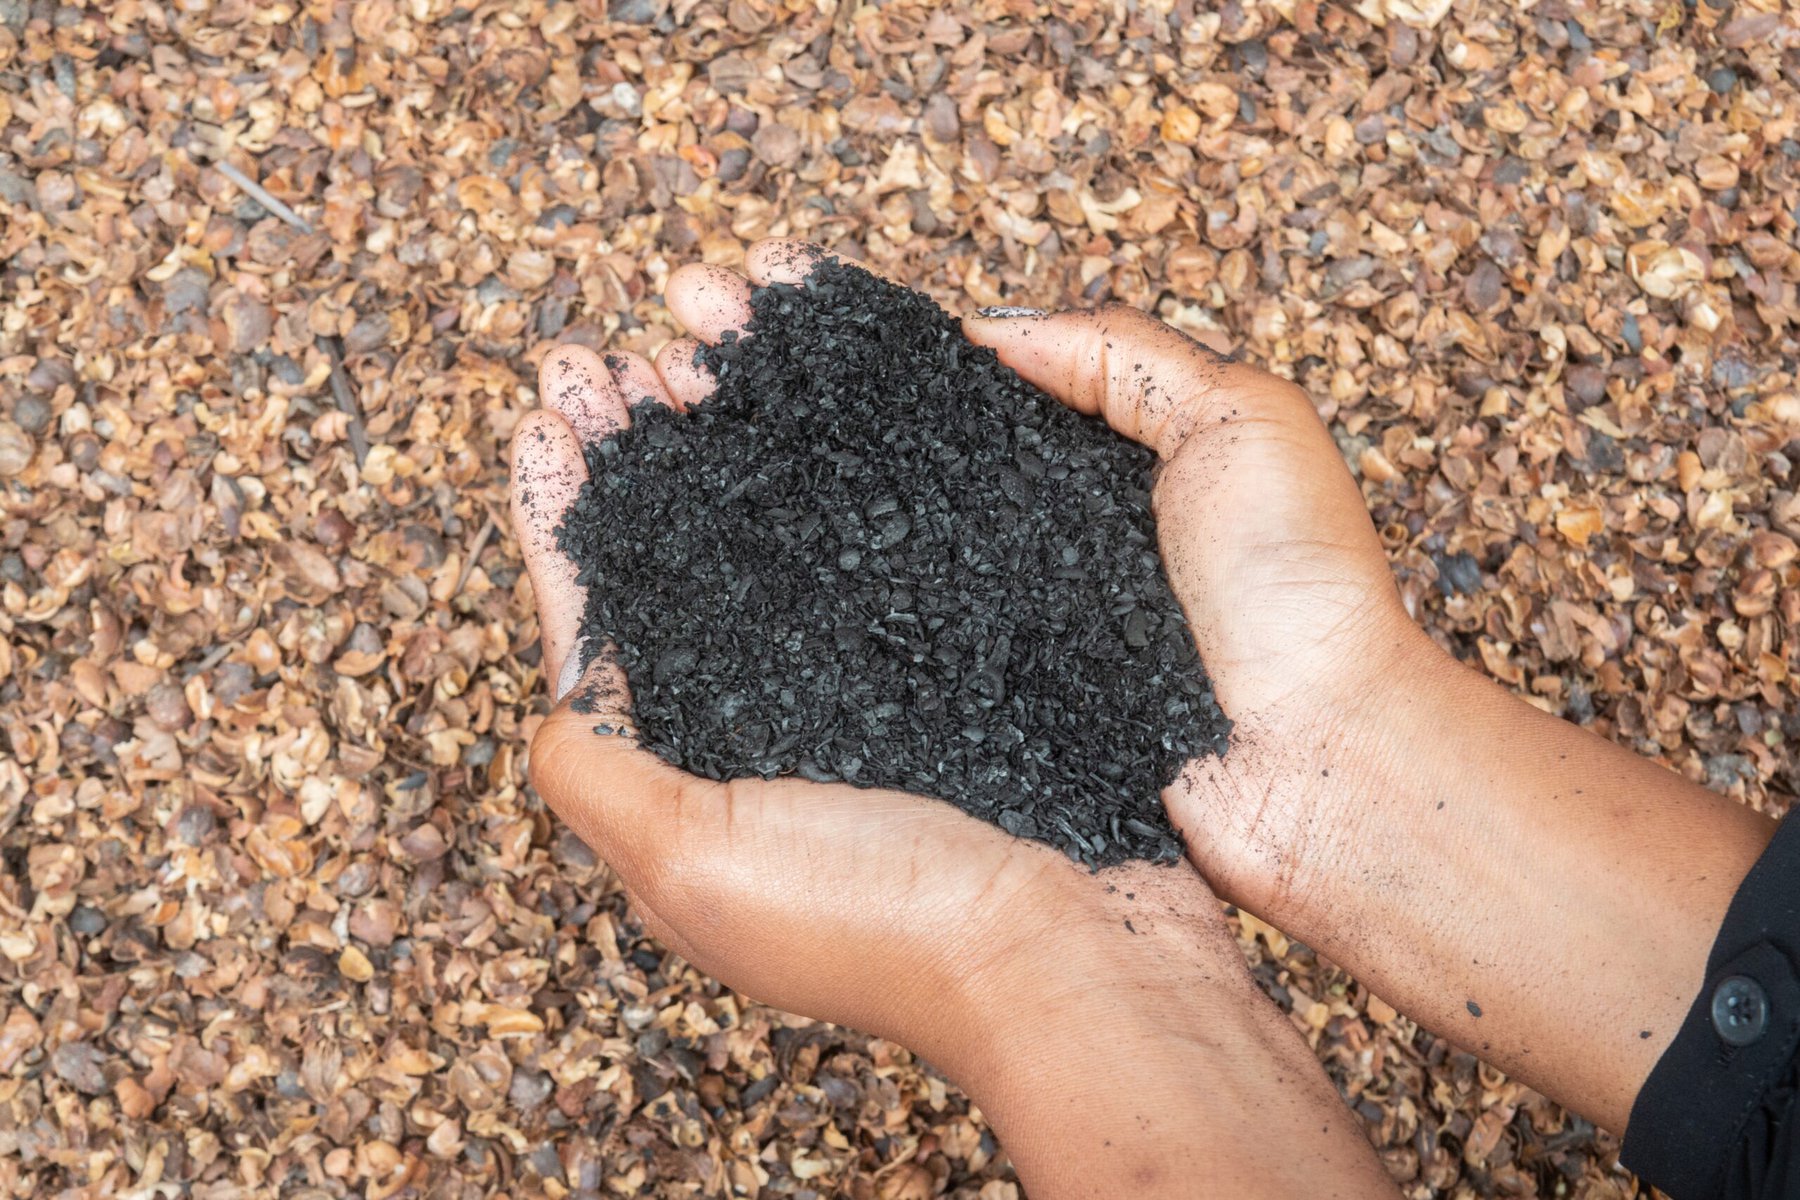 Though public awareness is low, some scientists believe “biochar” is quietly becoming the world’s first major carbon removal success